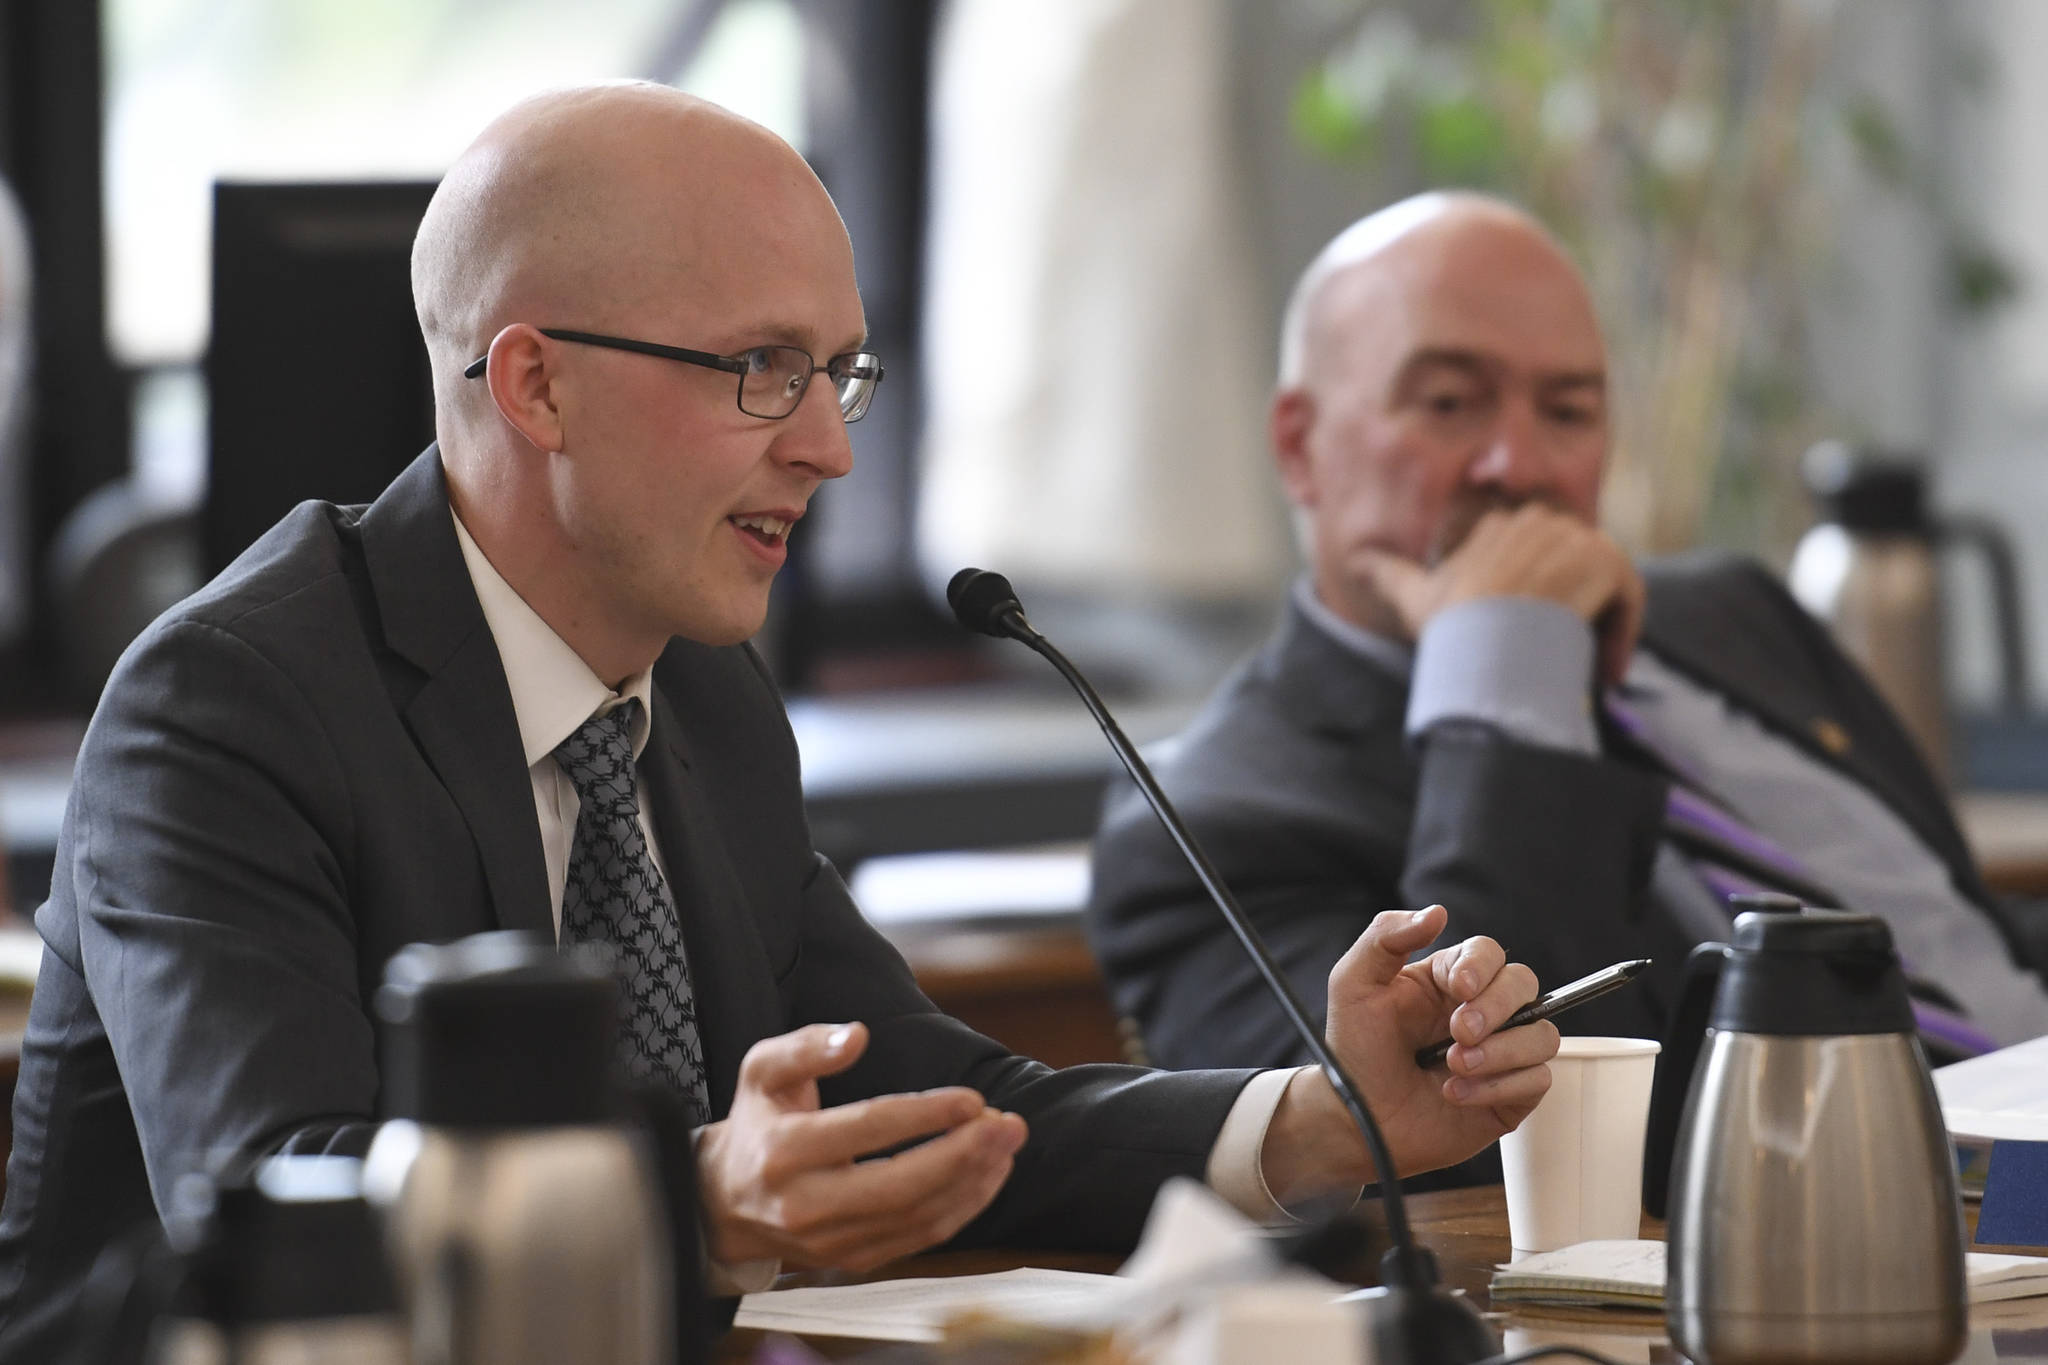 Rep. Jonathan Kreiss-Tomkins, D-Sitka, present one of three papers as Rep. Adam Wool, D-Fairbanks, listens during a Bicameral Permanent Fund Working Group at the Capitol on Monday, July 8, 2019. (Michael Penn | Juneau Empire)